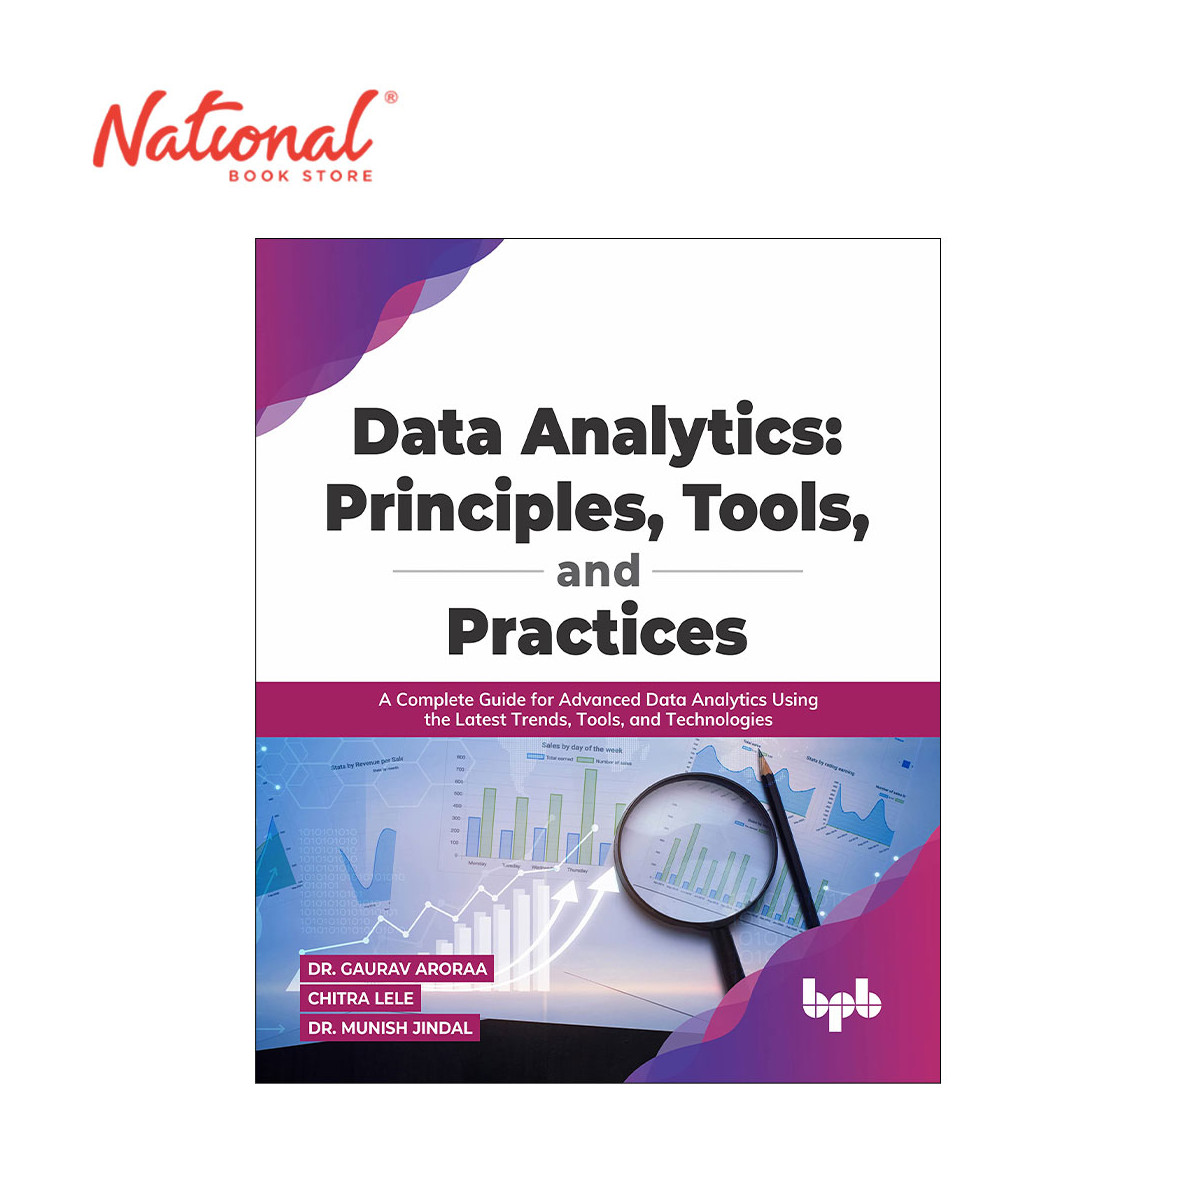 Data Analytics: Principles, Tools, and Practices by Dr. Gaurav Aroraa - Trade Paperback - College